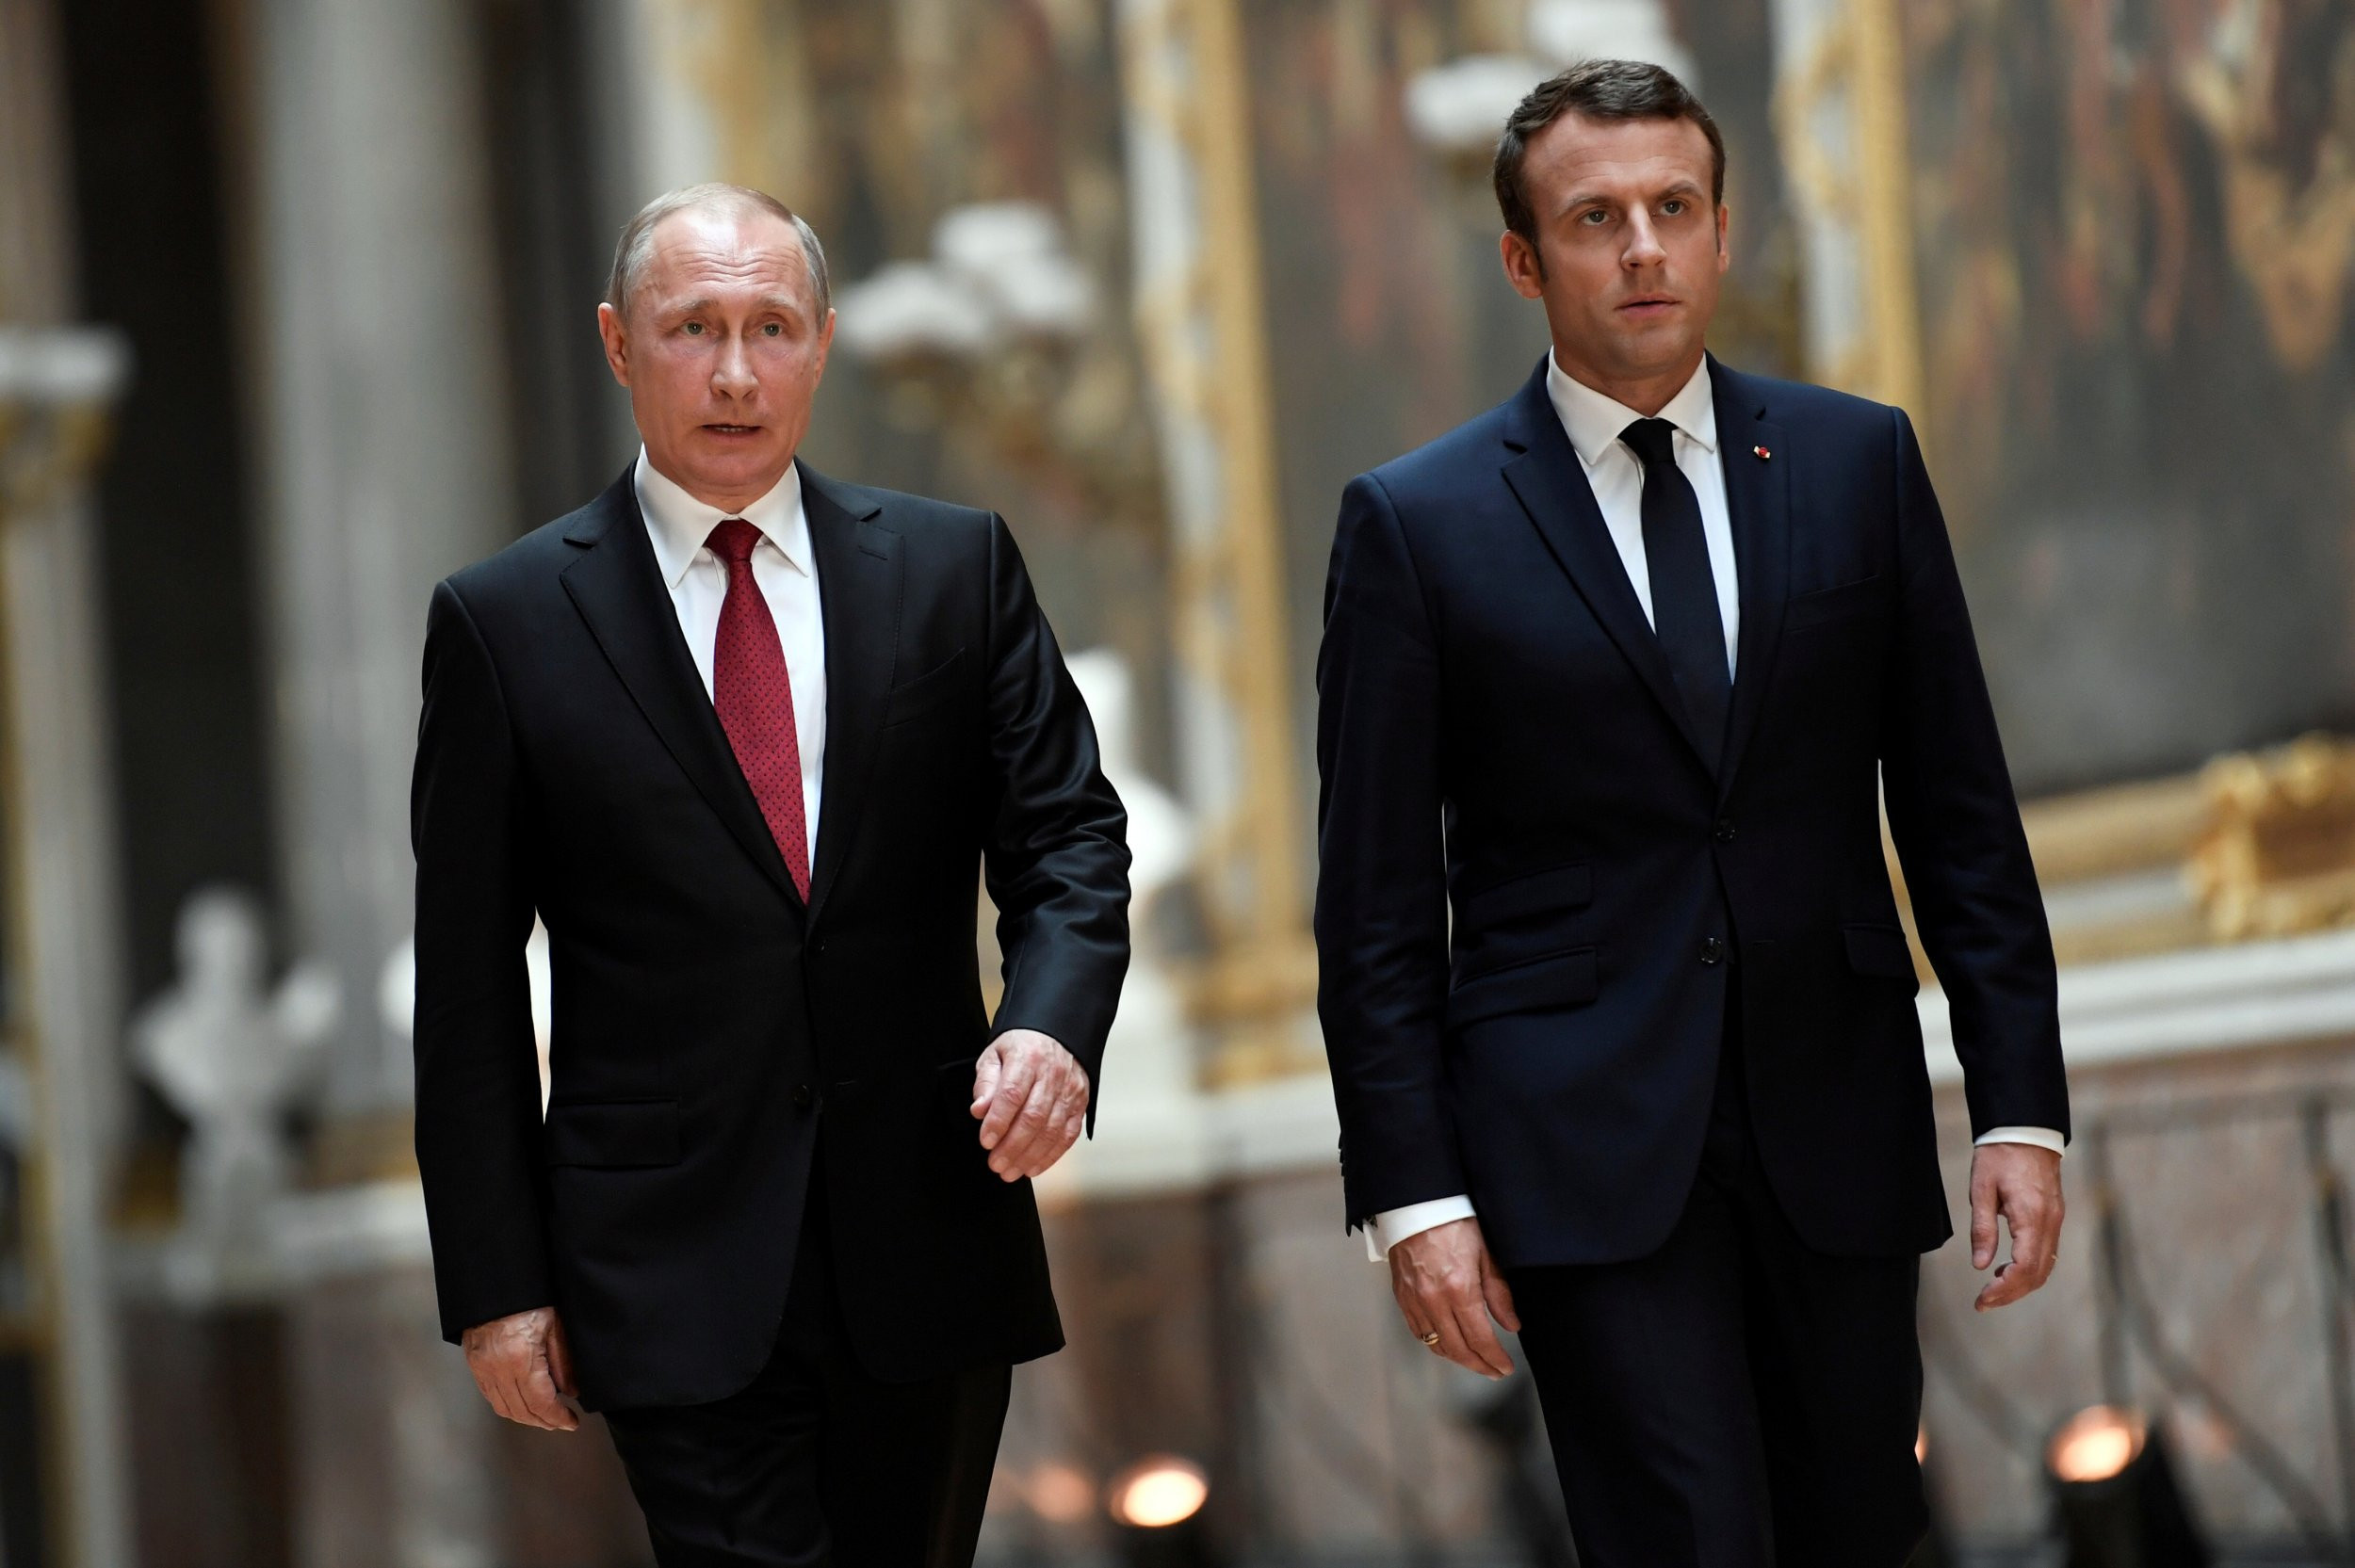 ‘THE WORST IS YET TO COME’ – VLADIMIR PUTIN TELLS FRENCH PRESIDENT, EMMANUEL MACRON THAT HE WON’T STOP WAR WITH UKRAINE TILL HIS GOAL IS ACHIEVED